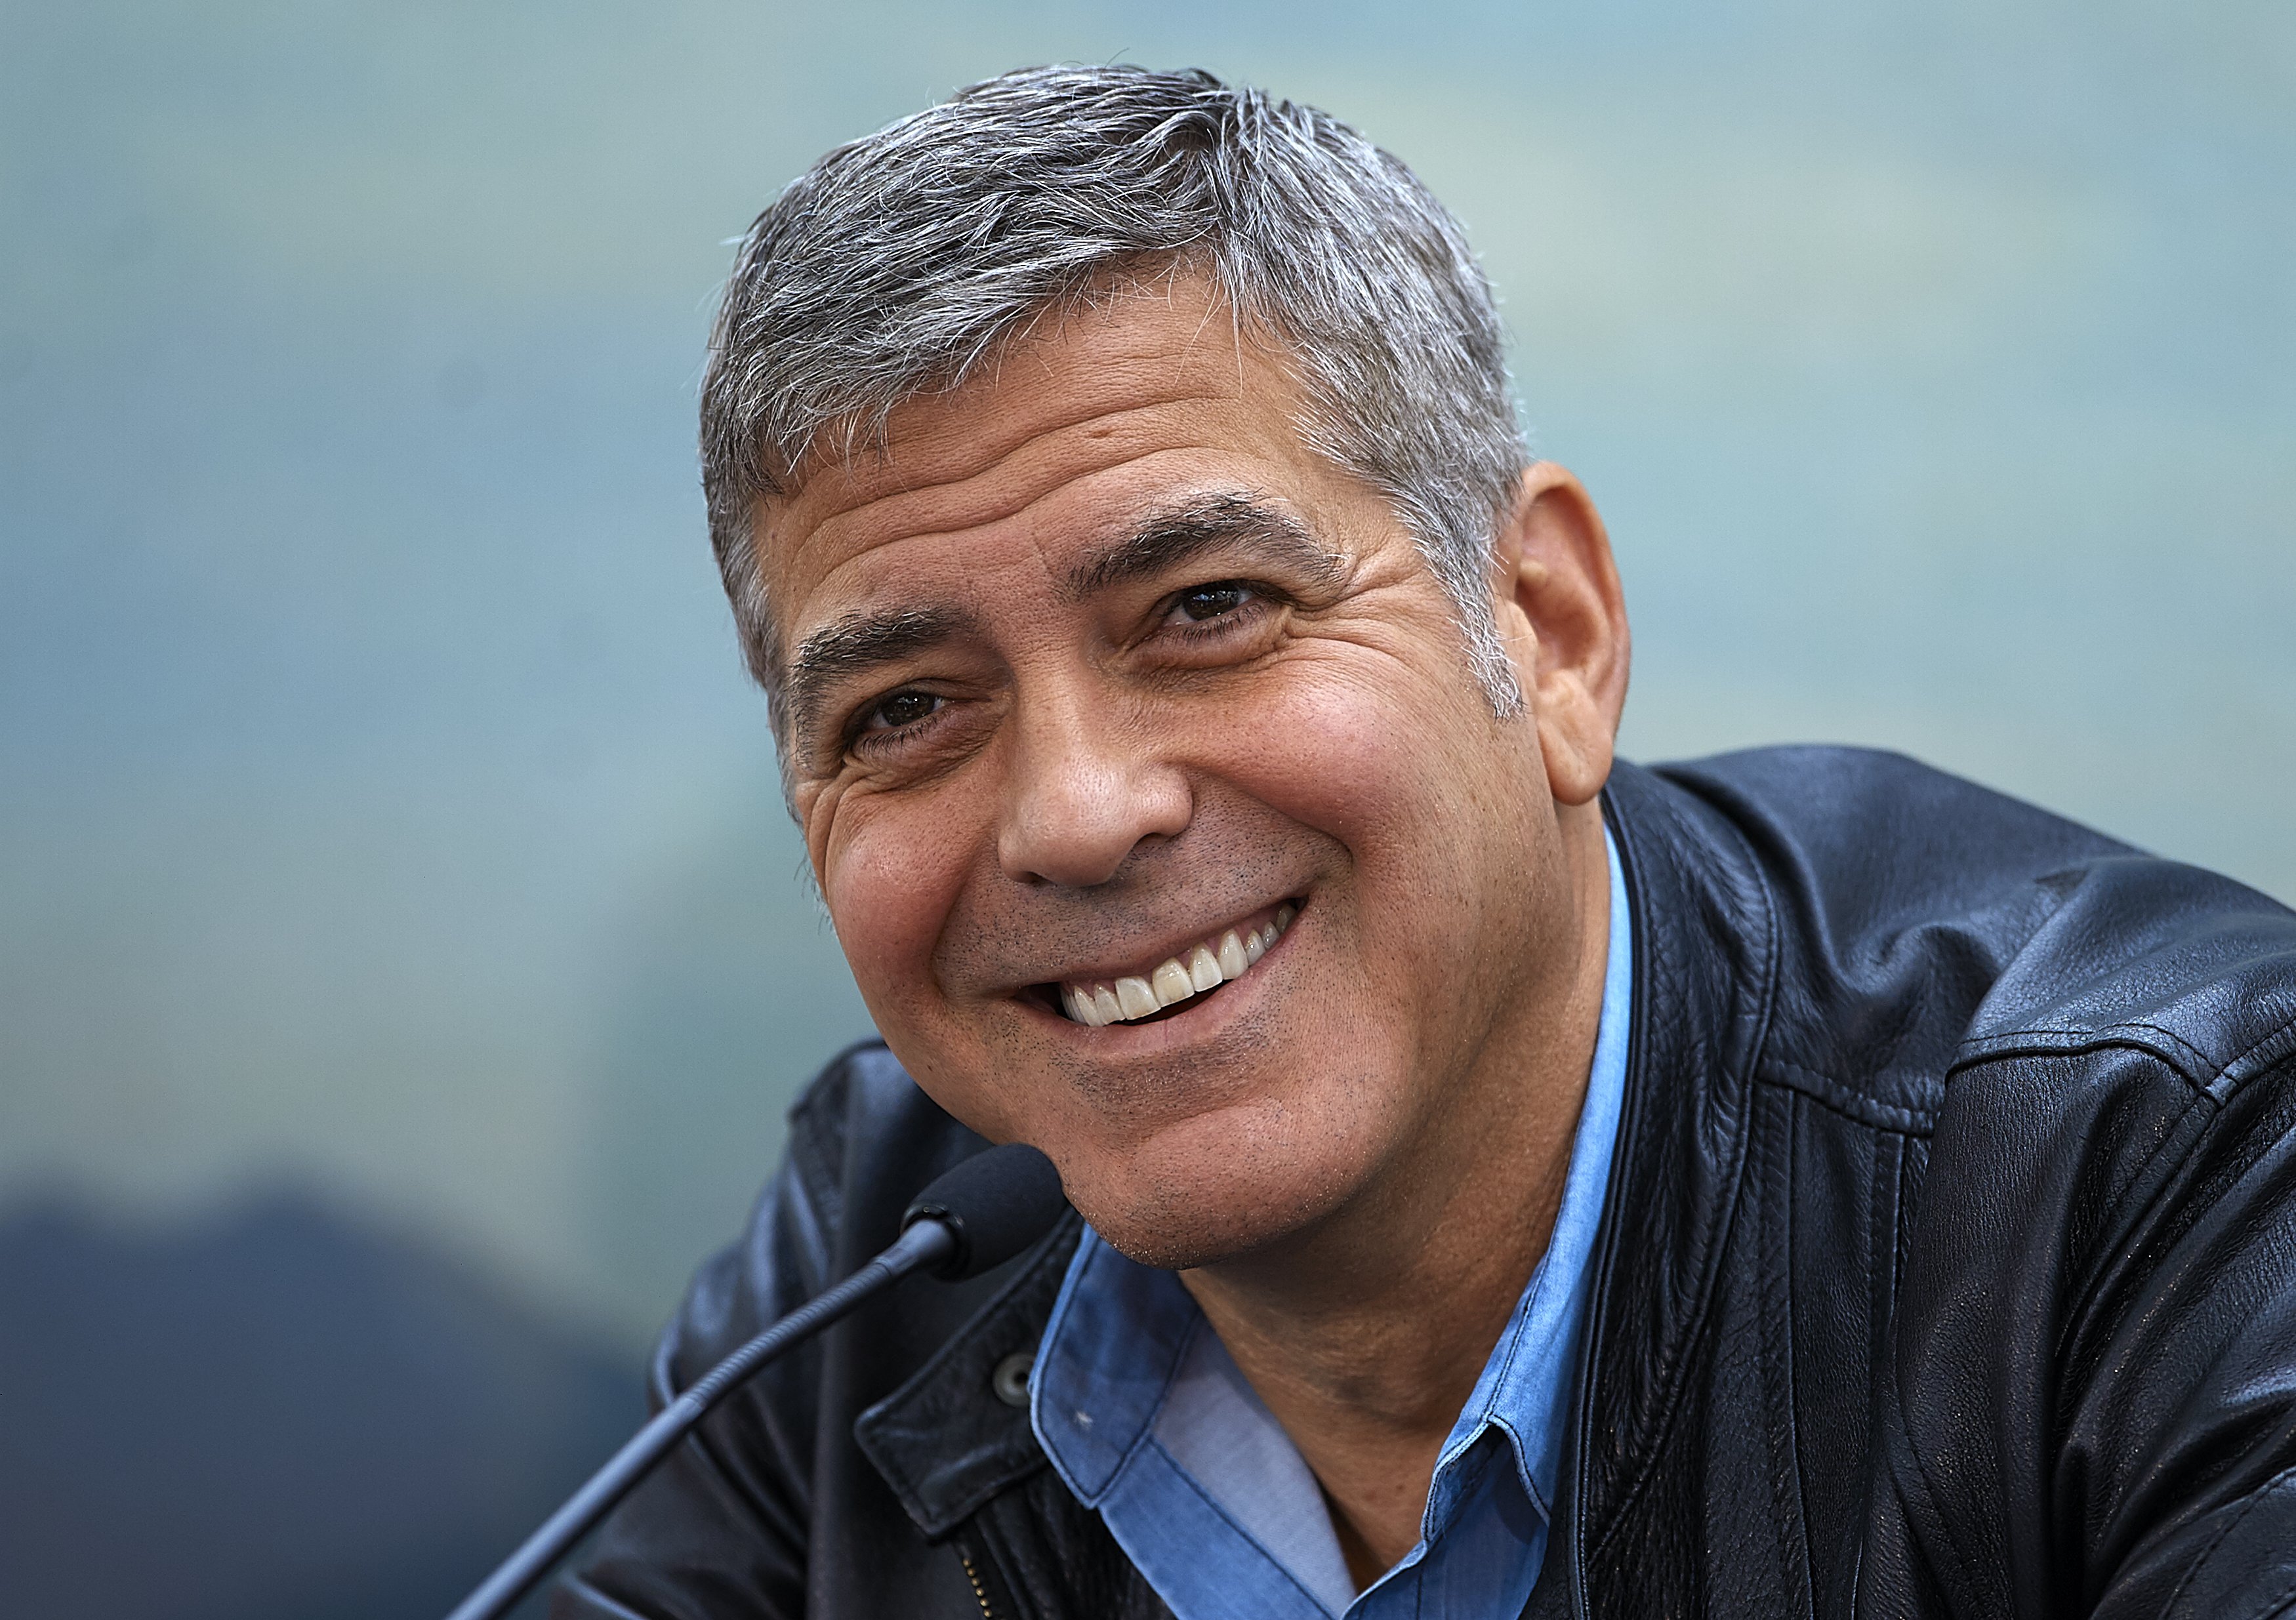 George Clooney during the "Tomorrowland" Press Conference at the L'Hemisferic on May 19, 2015 in Valencia, Spain. / Source: Getty Images